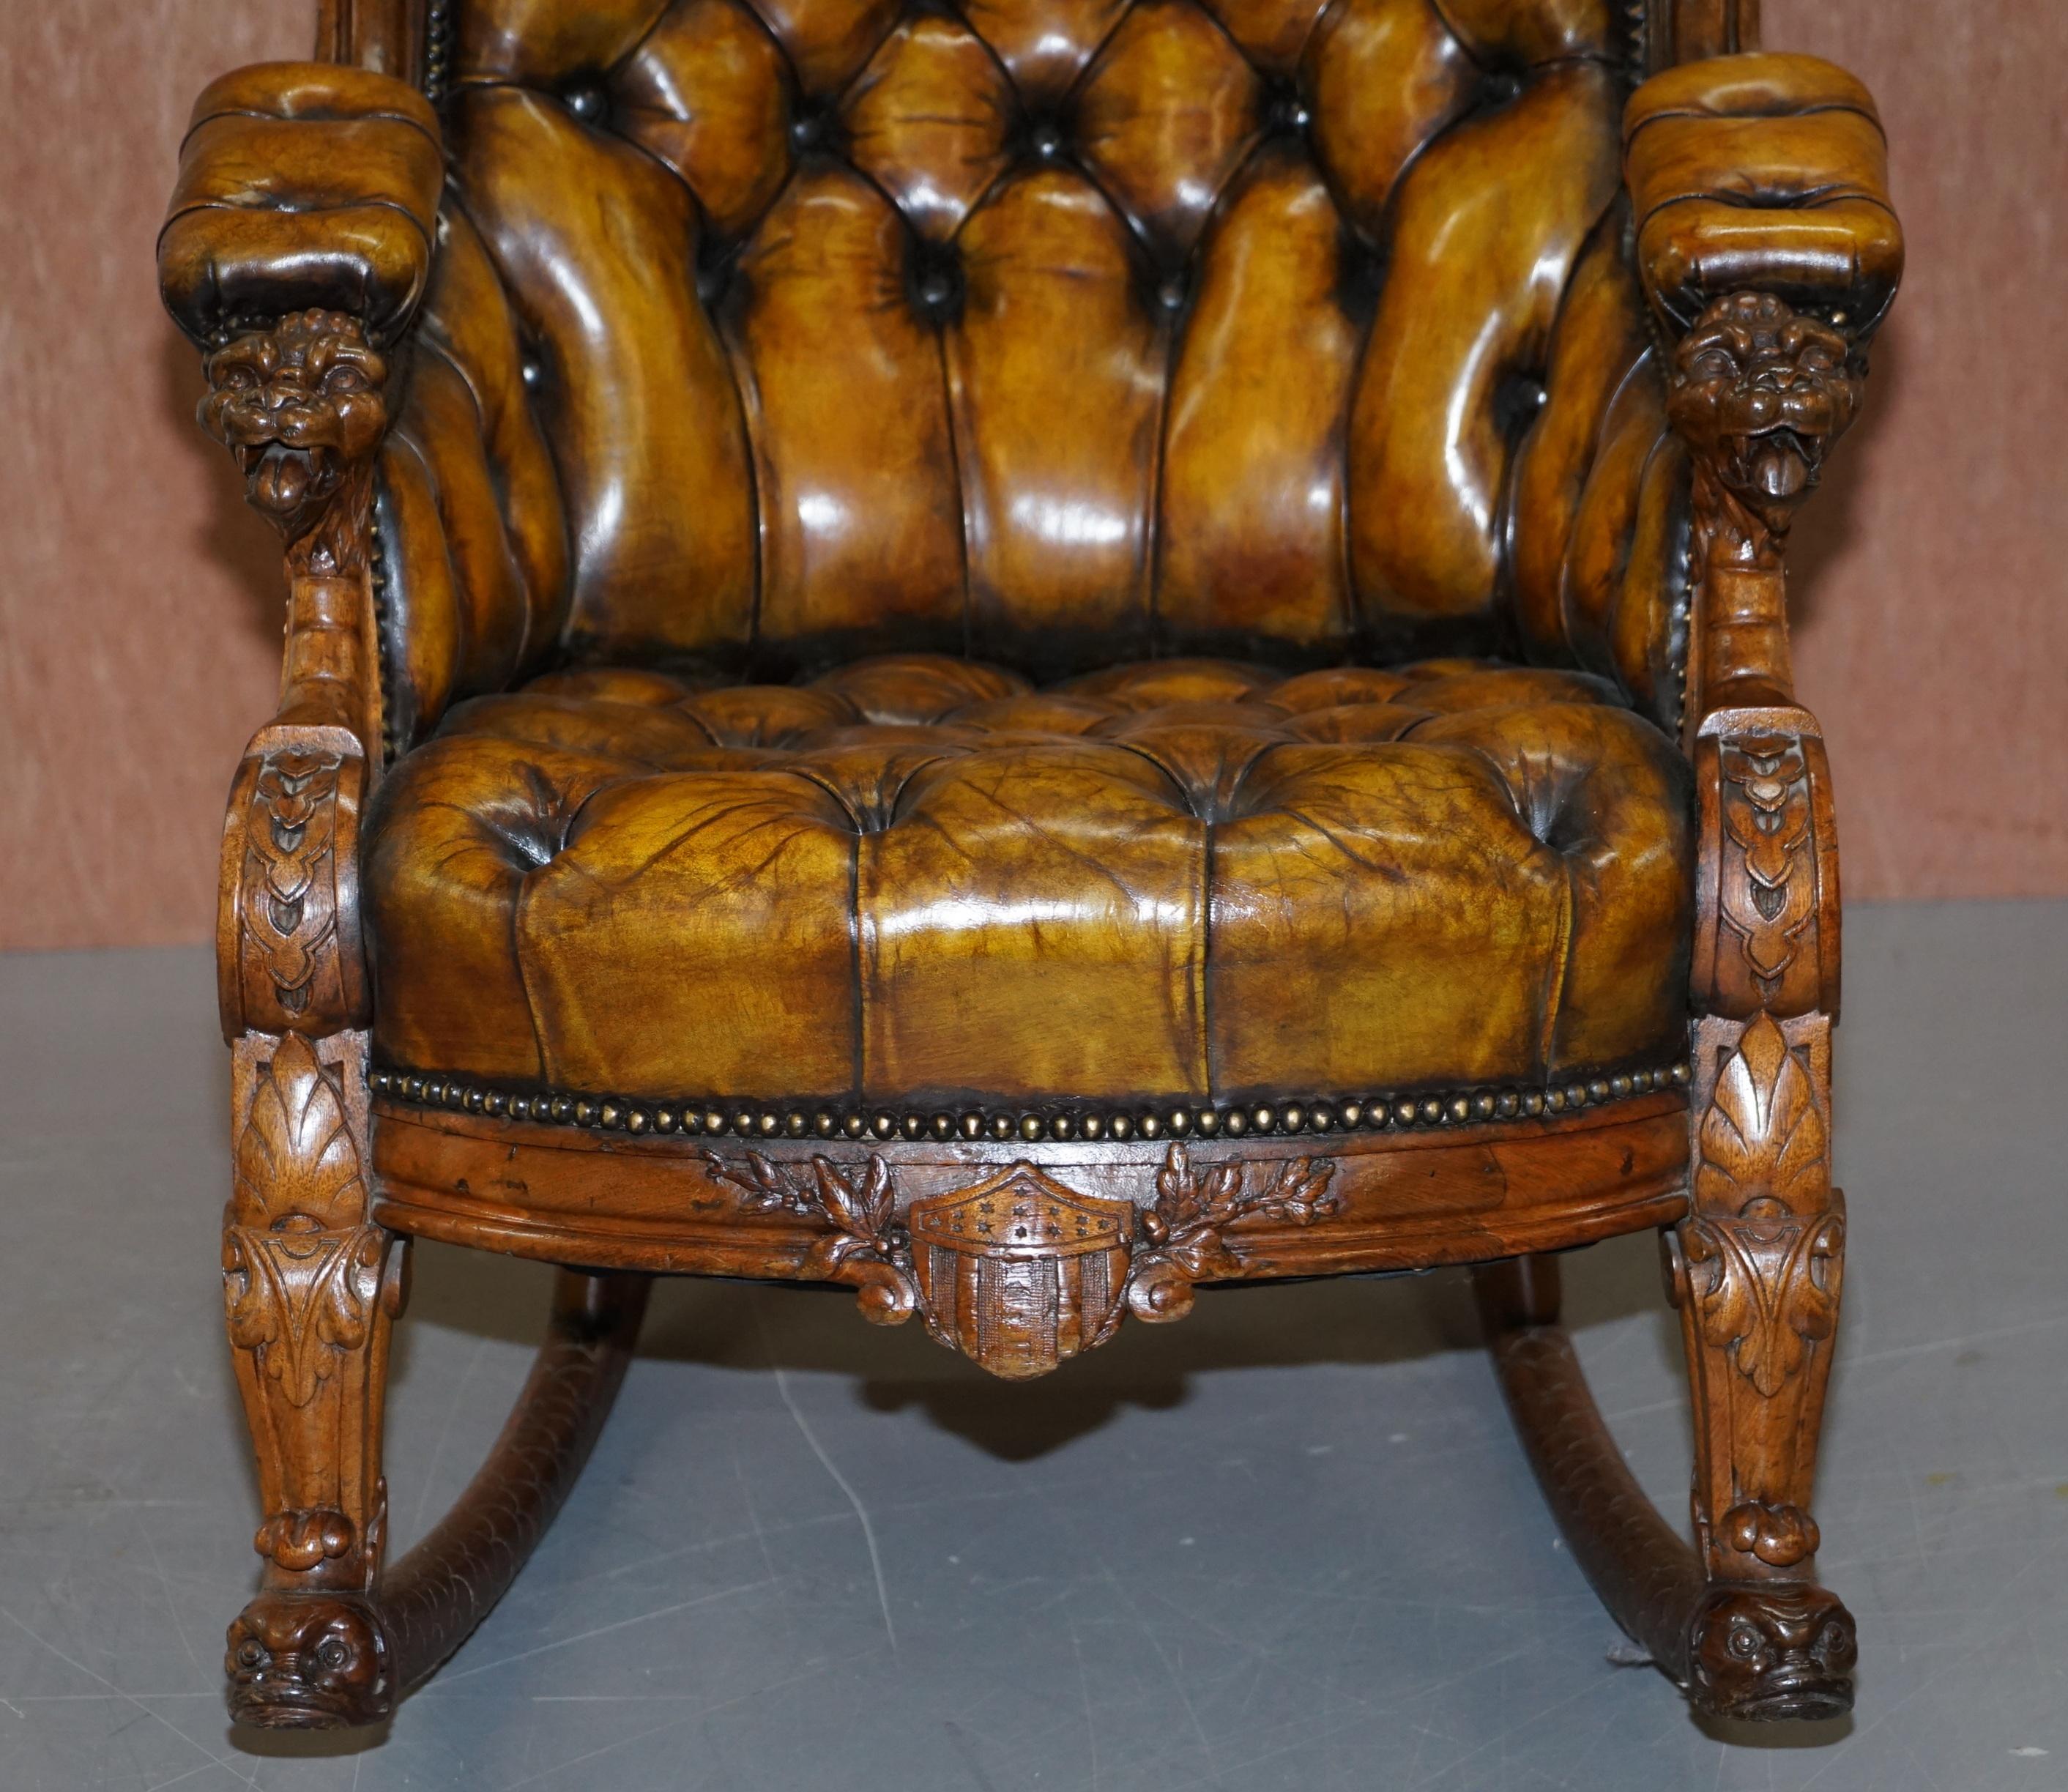 13 Star American Flag & Eagle 1830 Hand Carved Chesterfield Rocking Armchair 2